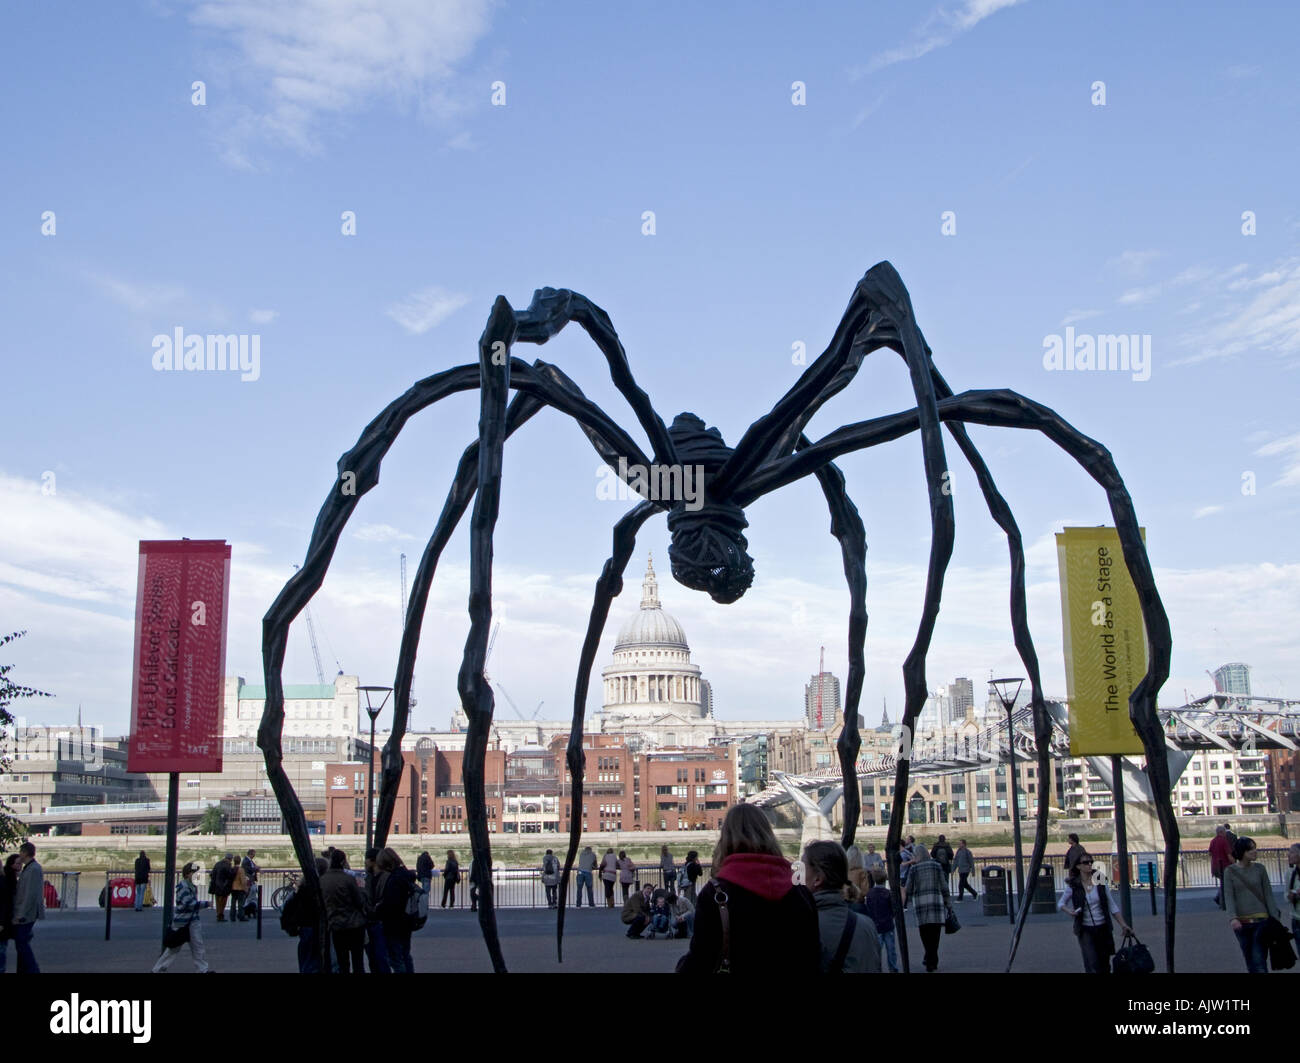 Louise Bourgeois's giant spider sculpture Maman with St.Paul's cathedral in the background Stock Photo